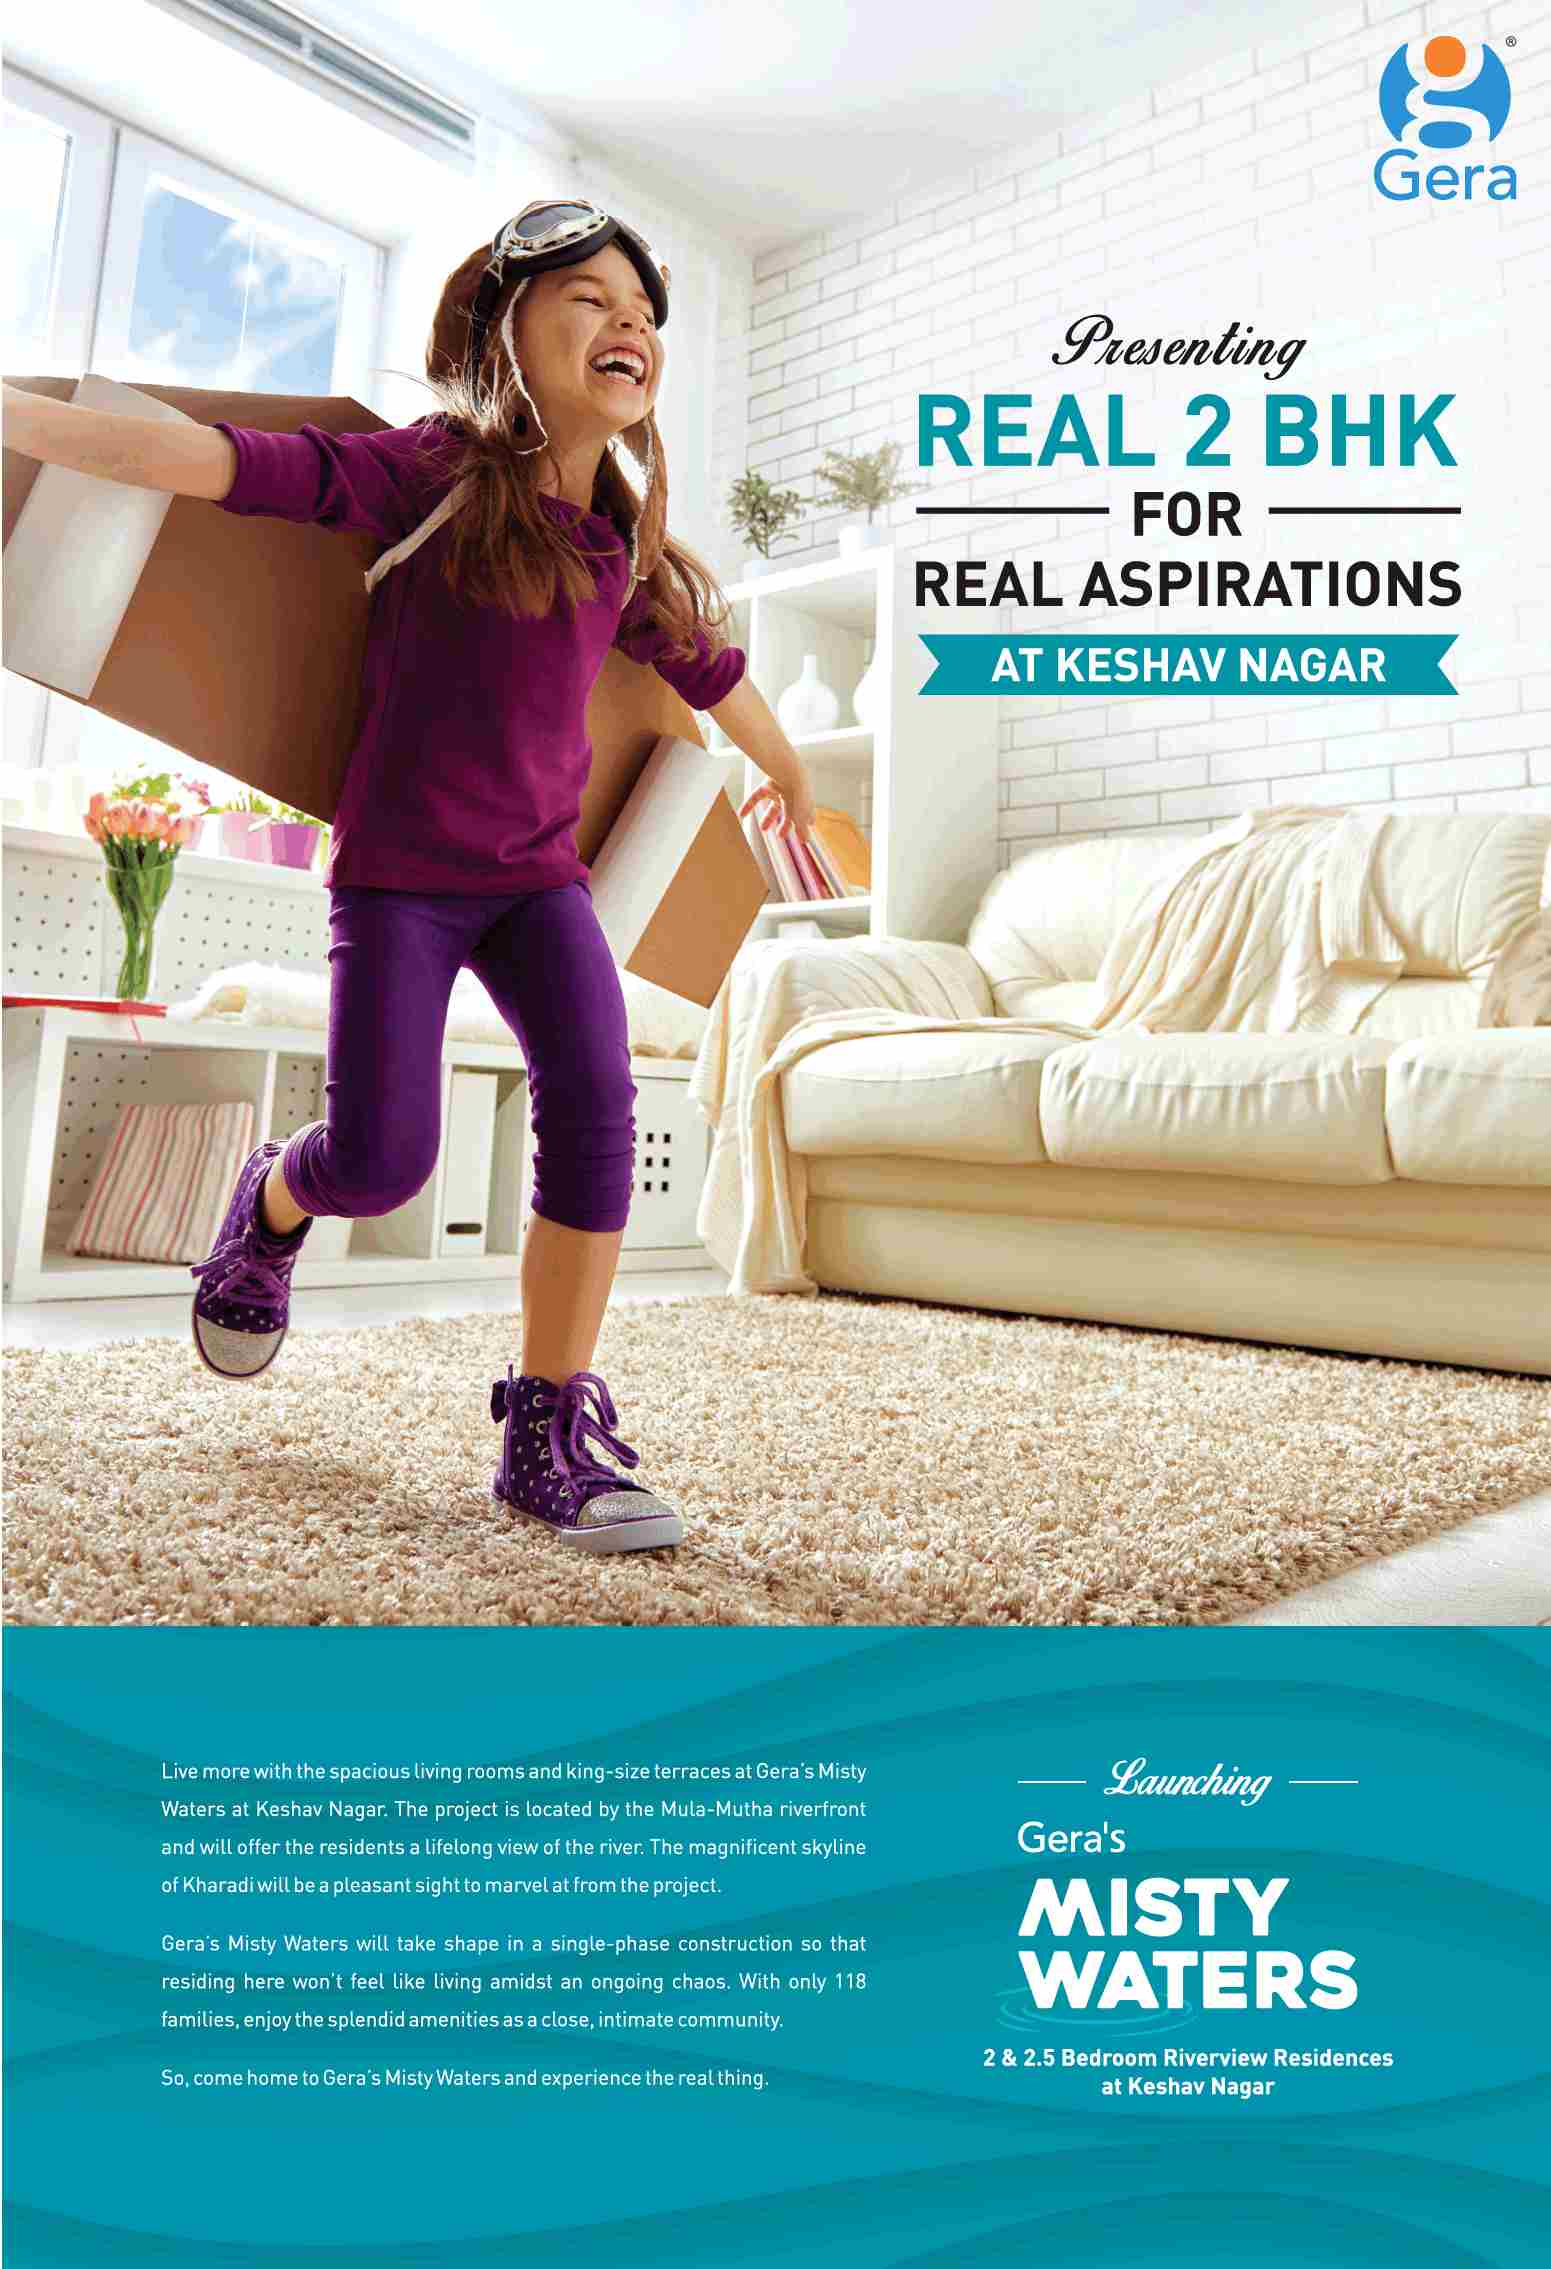 Live more with the spacious living rooms and king-size terraces at Gera Misty Waters in Pune